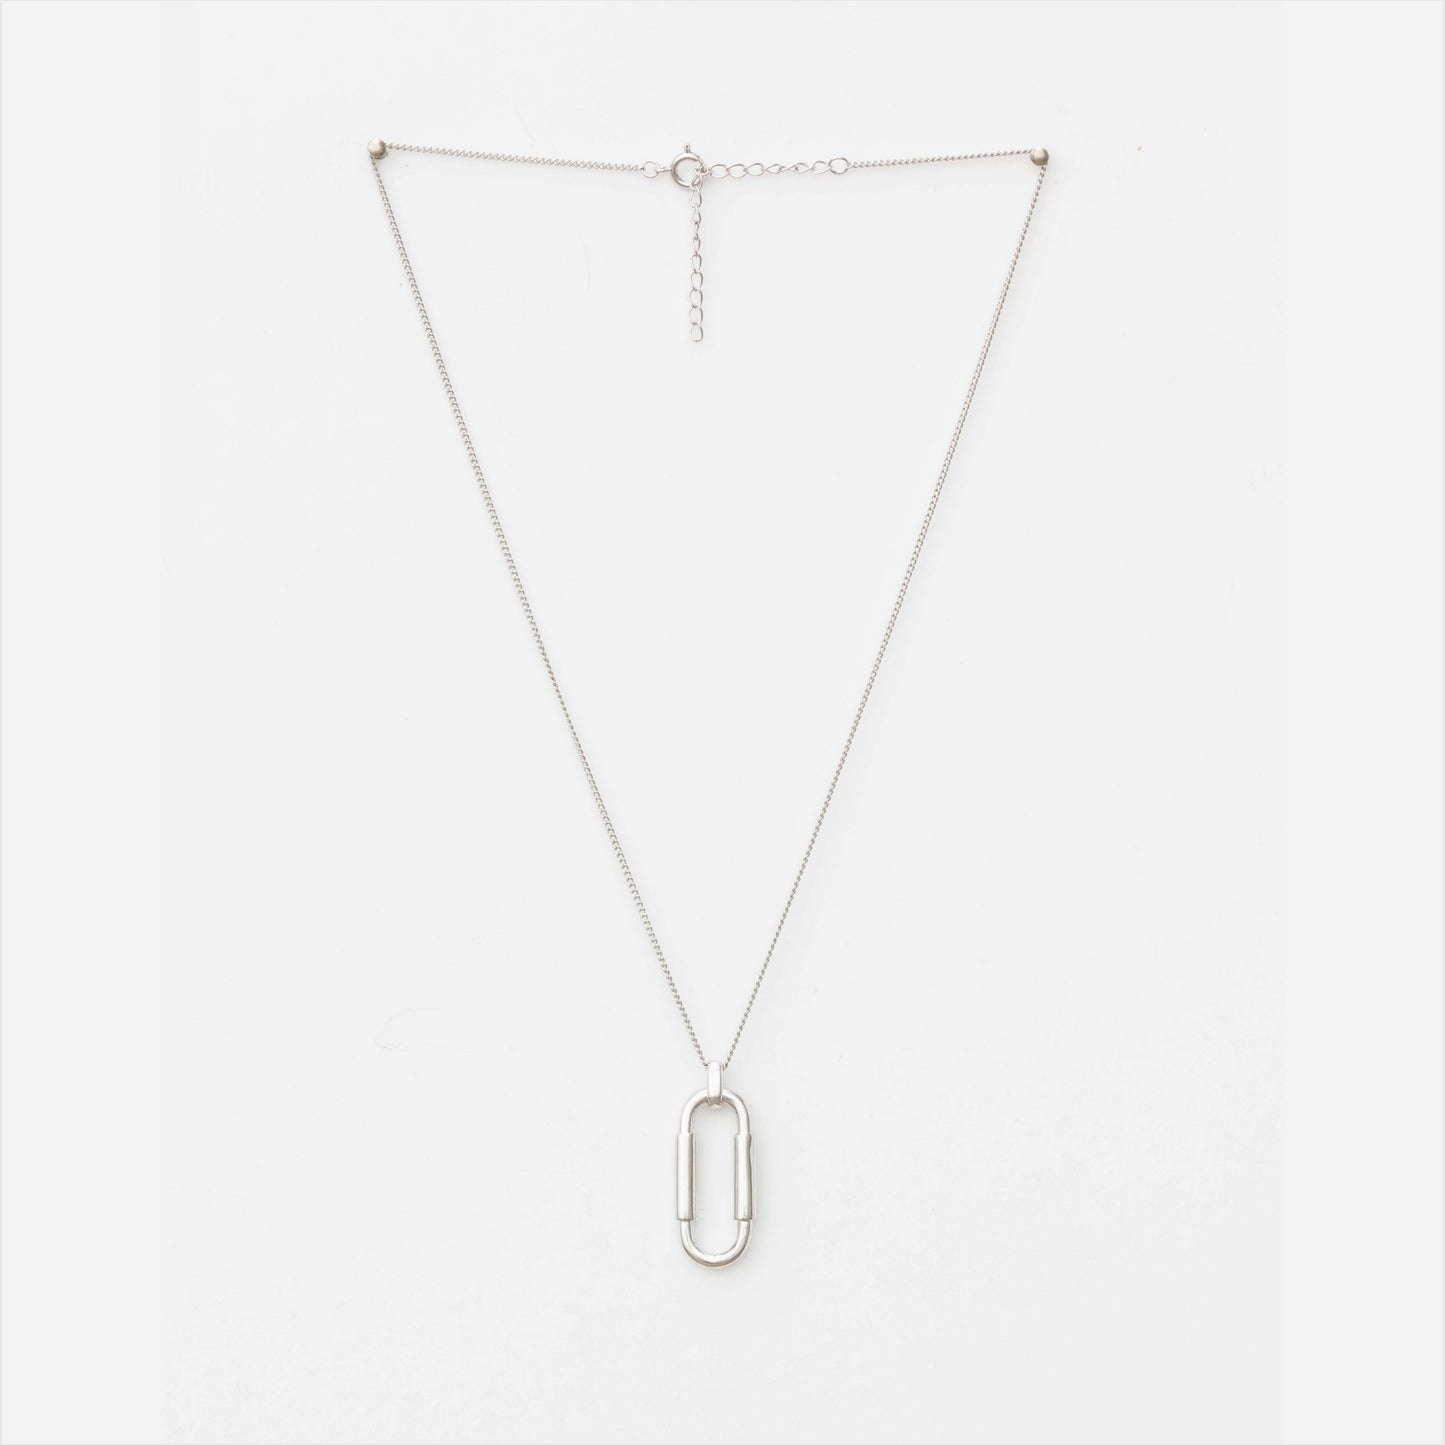 Nina Chain Link Necklace